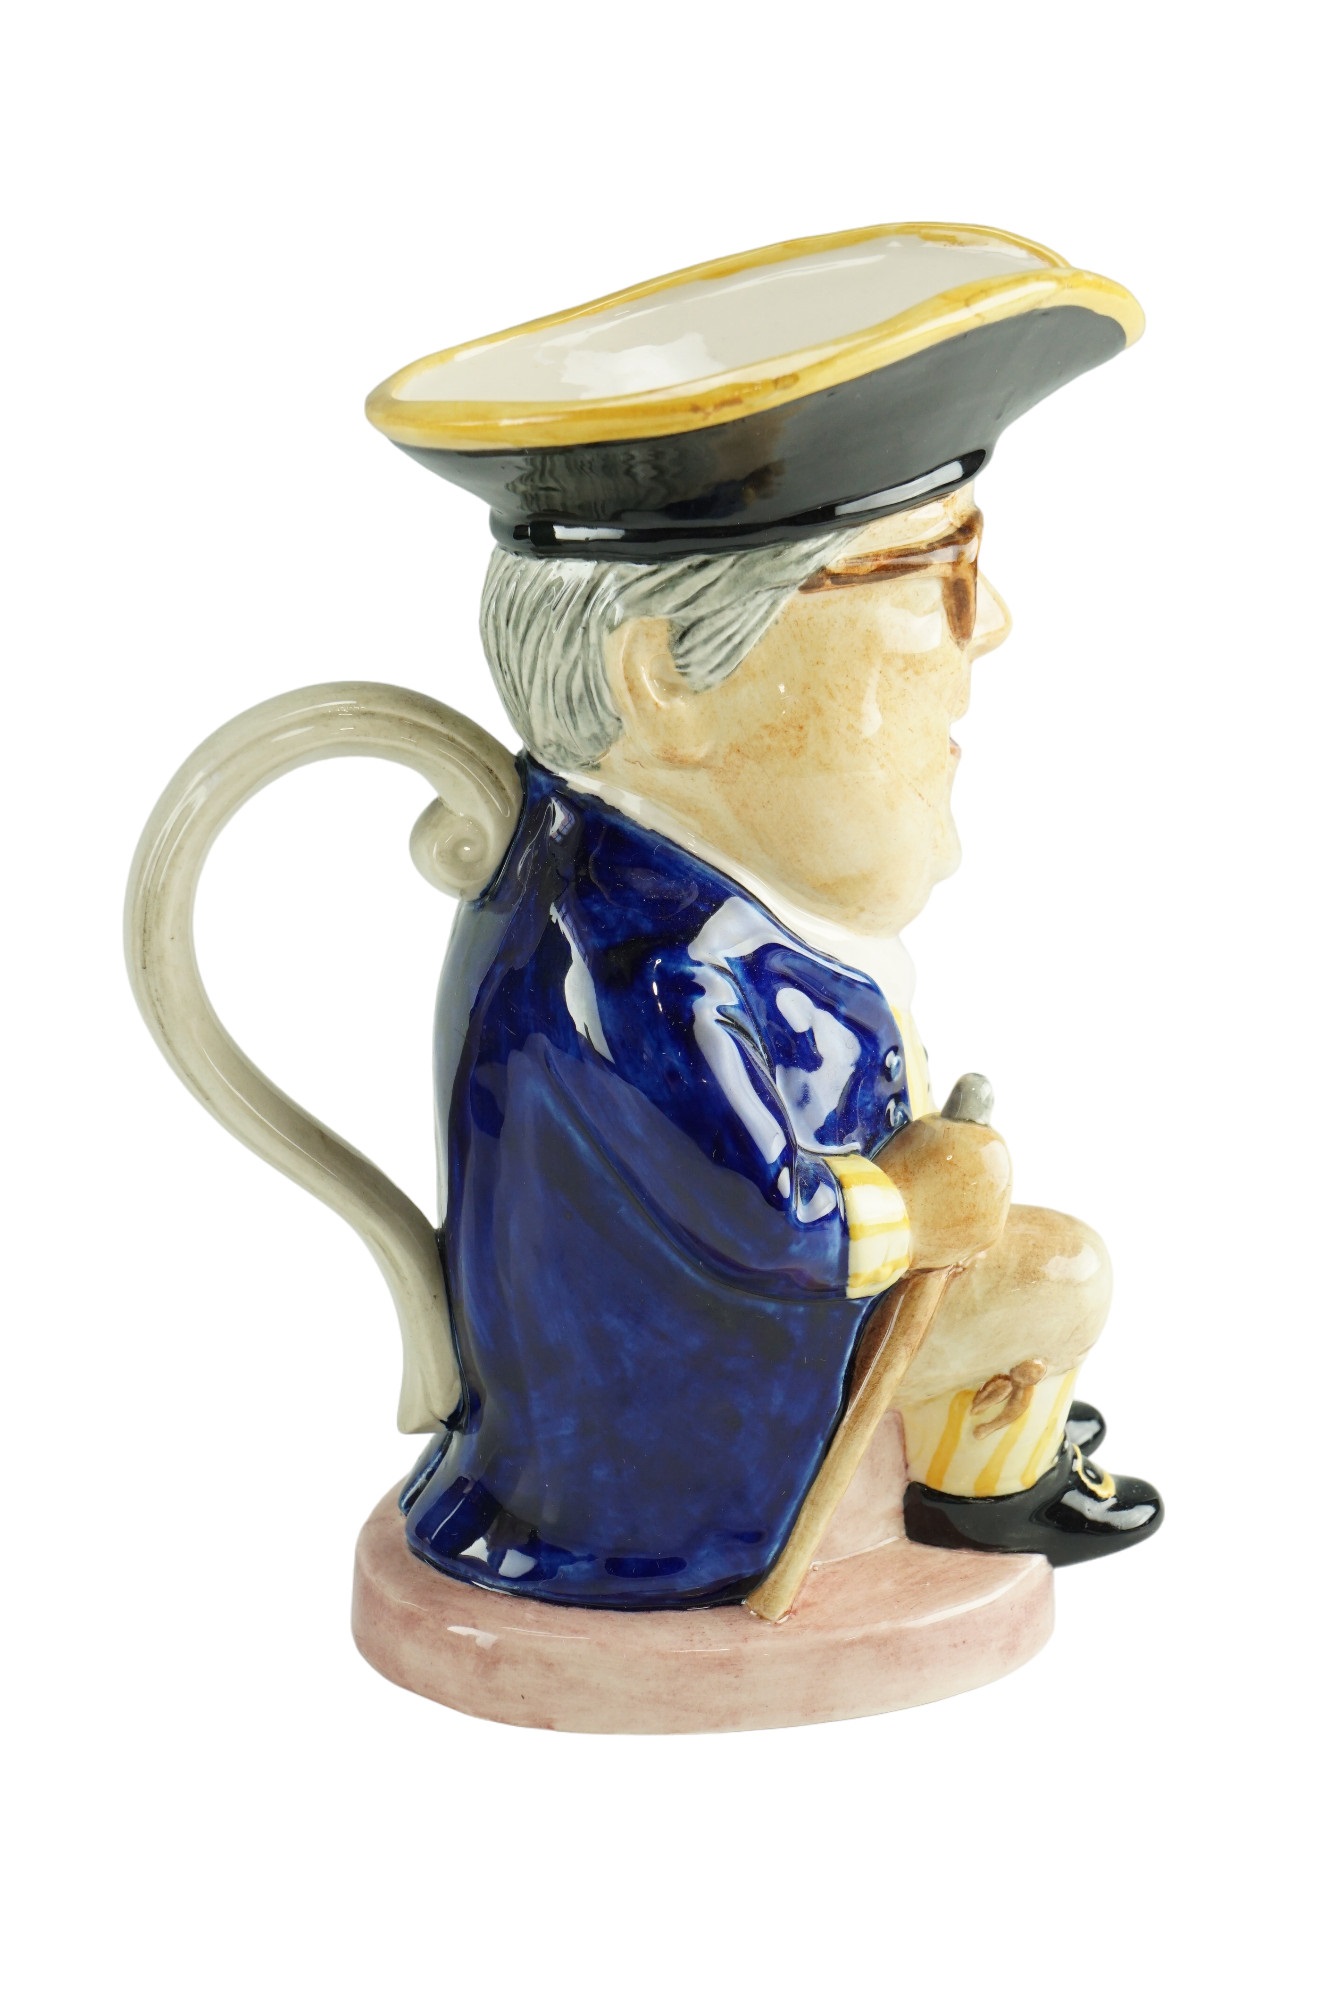 A boxed limited edition Henry Sandon character jug by Kevin Francs Ceramics, numbered 310/750, - Image 4 of 8